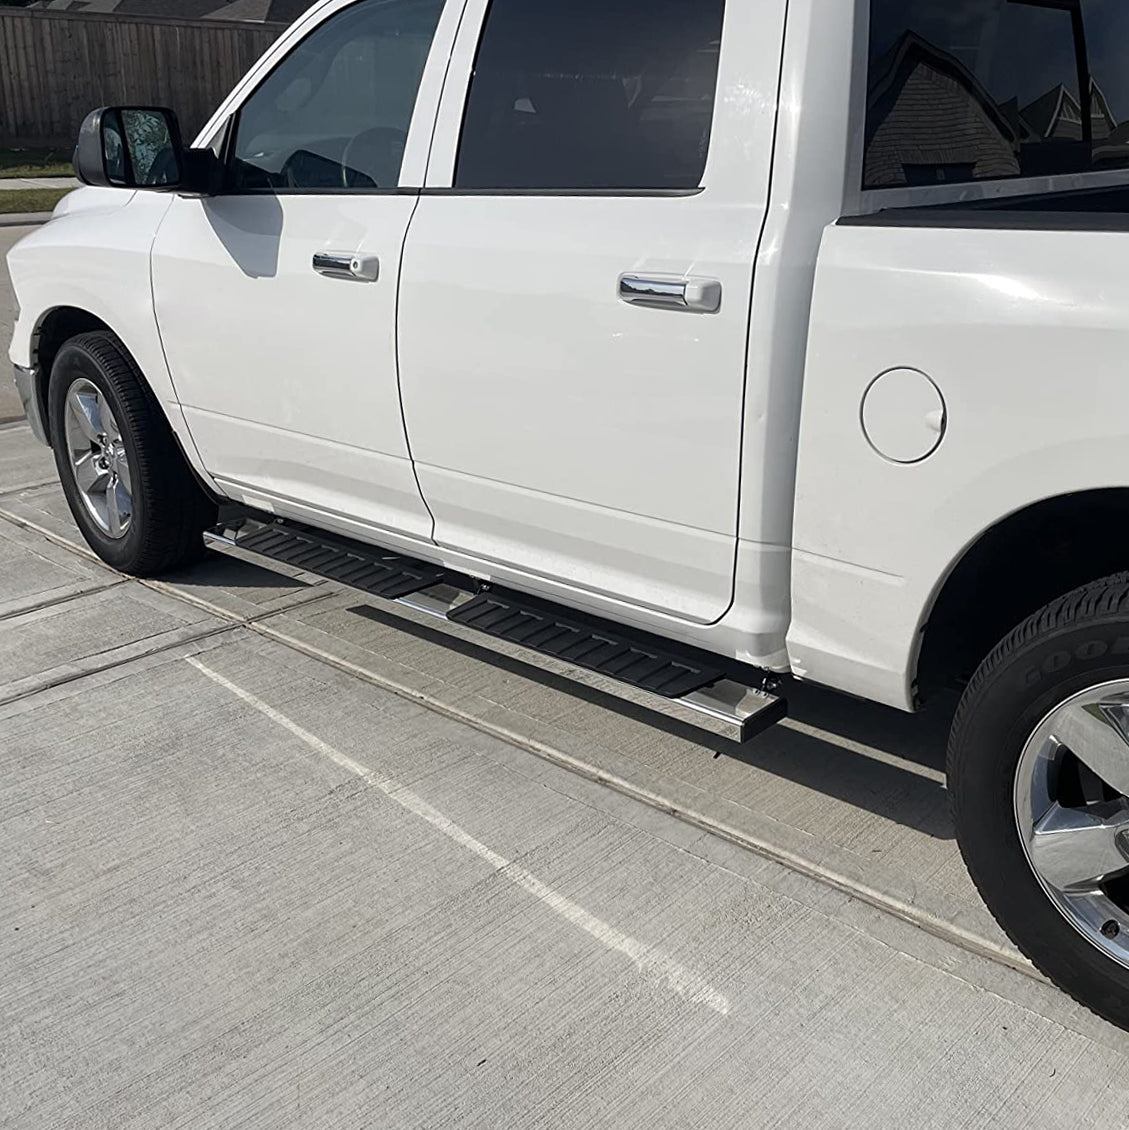 Running Boards Compatible with 2002-2008 Dodge Ram 1500, 2003-2009 Ram 2500 3500 Crew Cab/Quad Cab with 3/4 Size Rear Doors, Stainless Steel Side Steps H6 Style. - COMNOVA AUTOPART